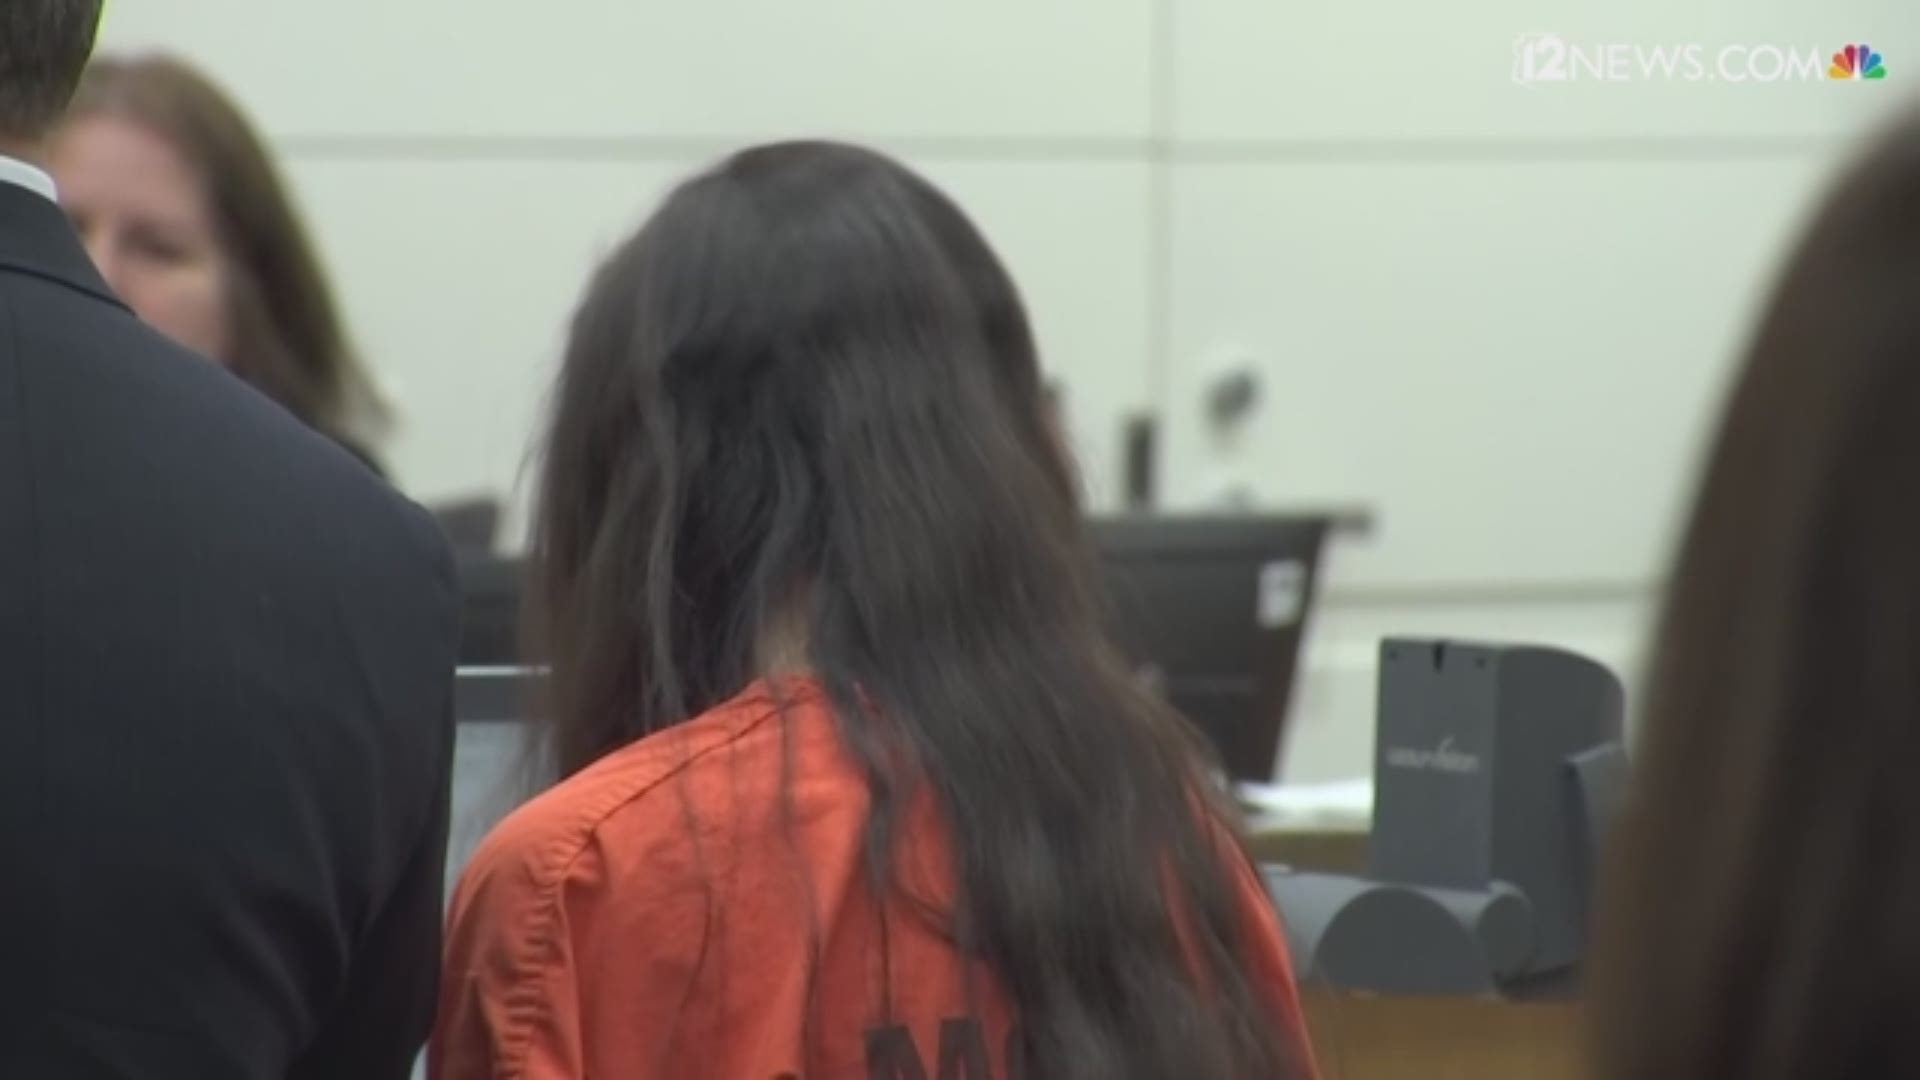 Rachel Henry appeared in court on Tuesday, when she pleaded not guilty in the deaths of her three children. (Pool camera video)